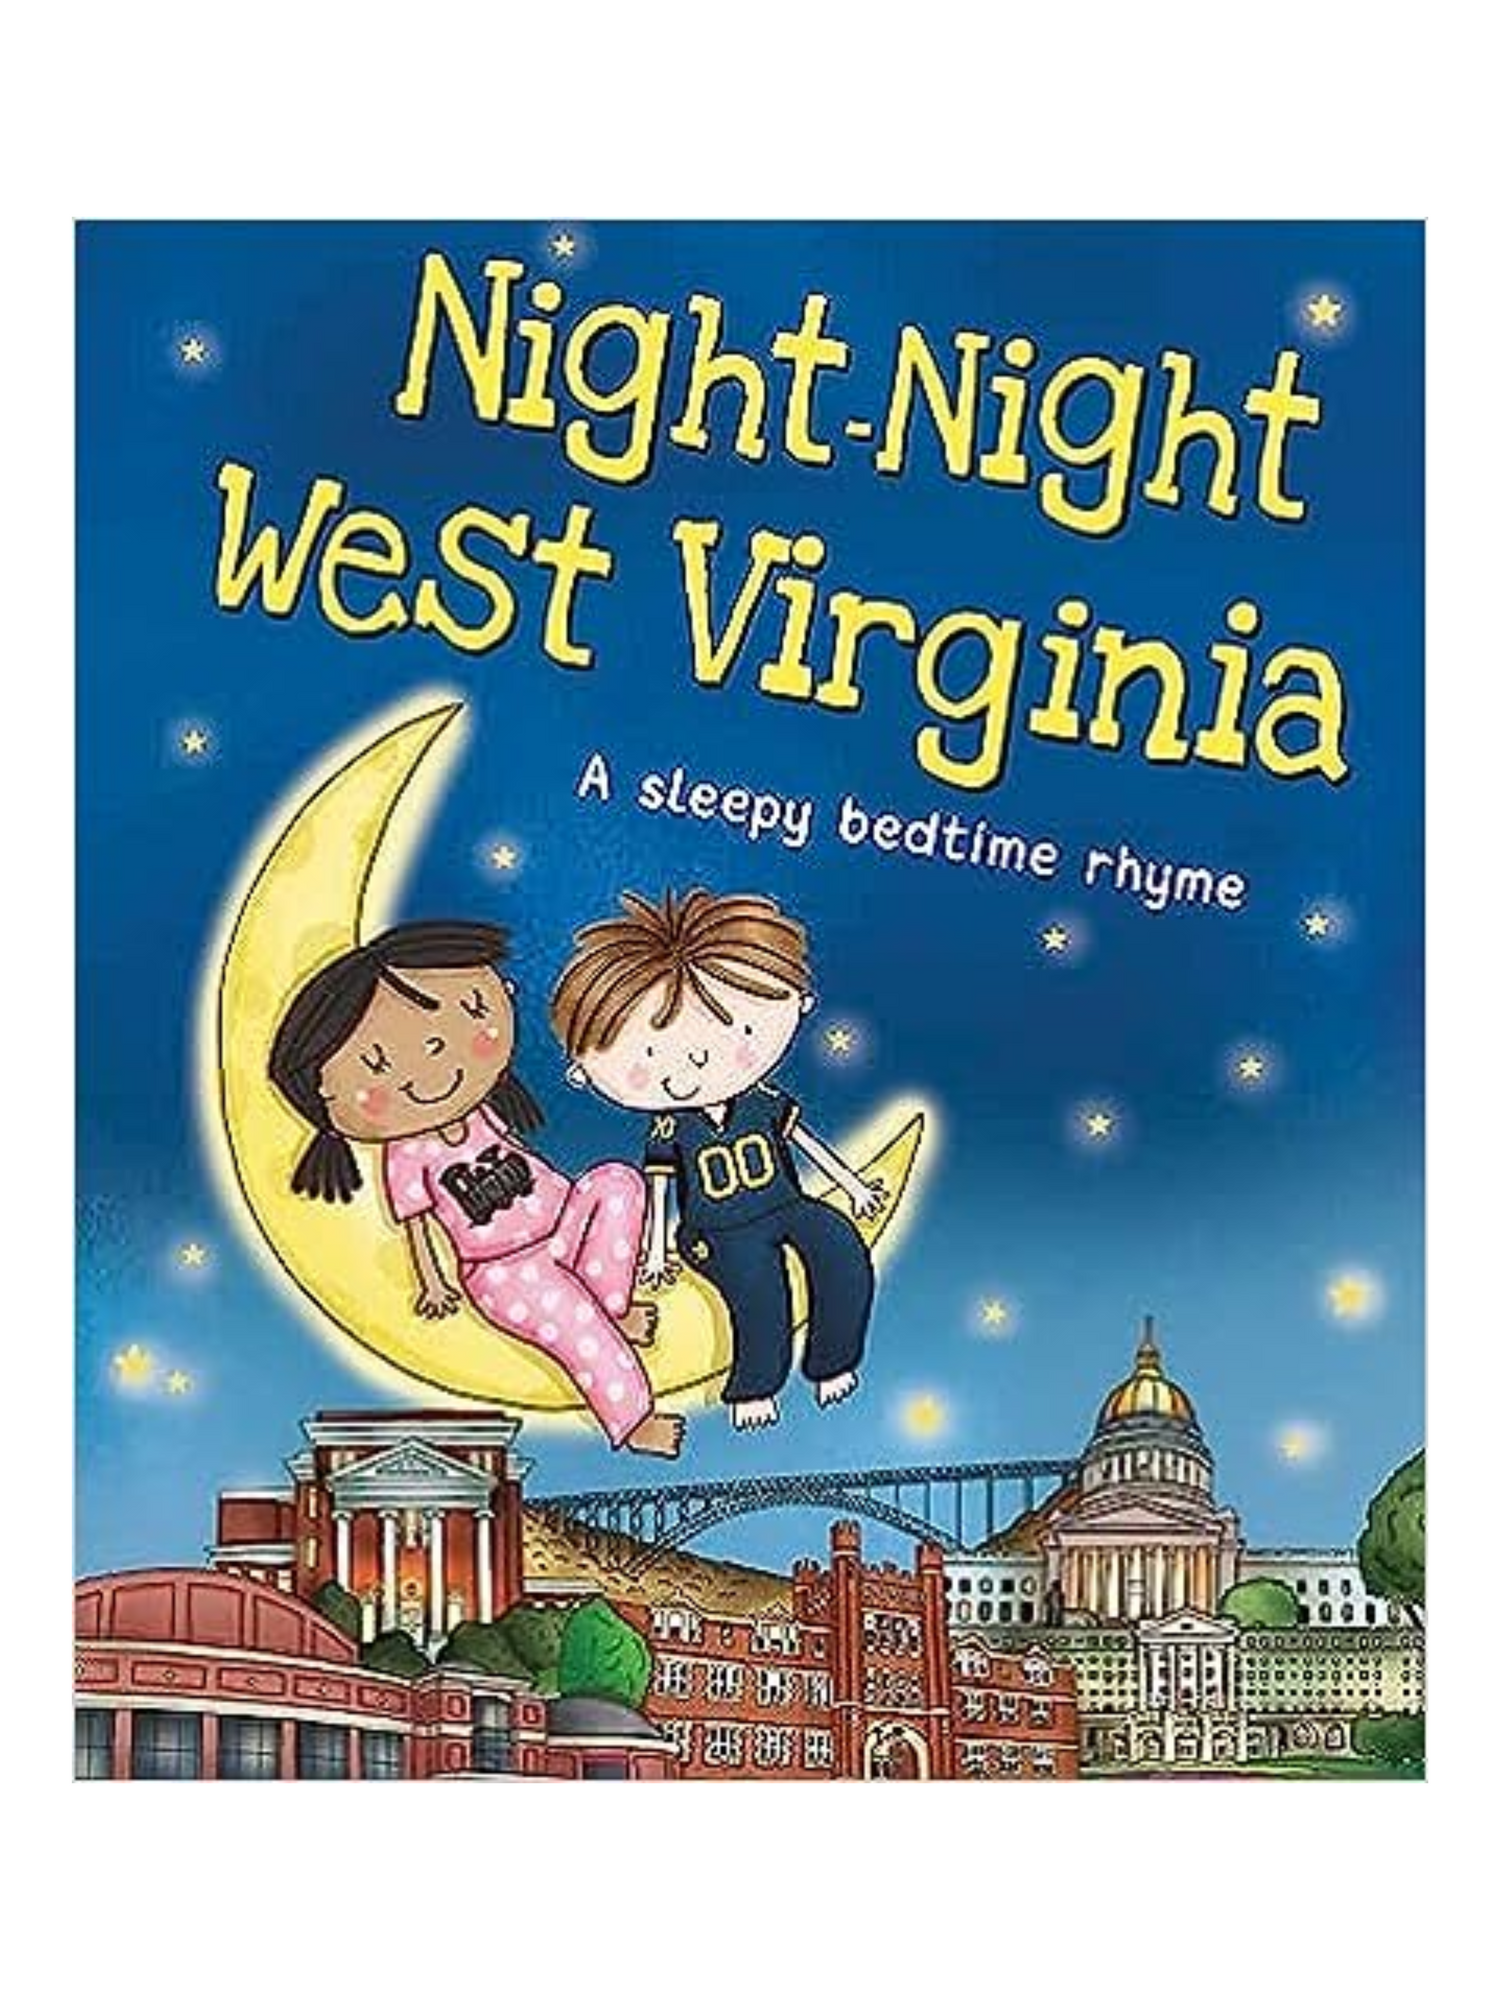 NIGHT NIGHT WEST VIRGINIA CHILDREN'S BOOK - THE LITTLE EAGLE BOUTIQUE